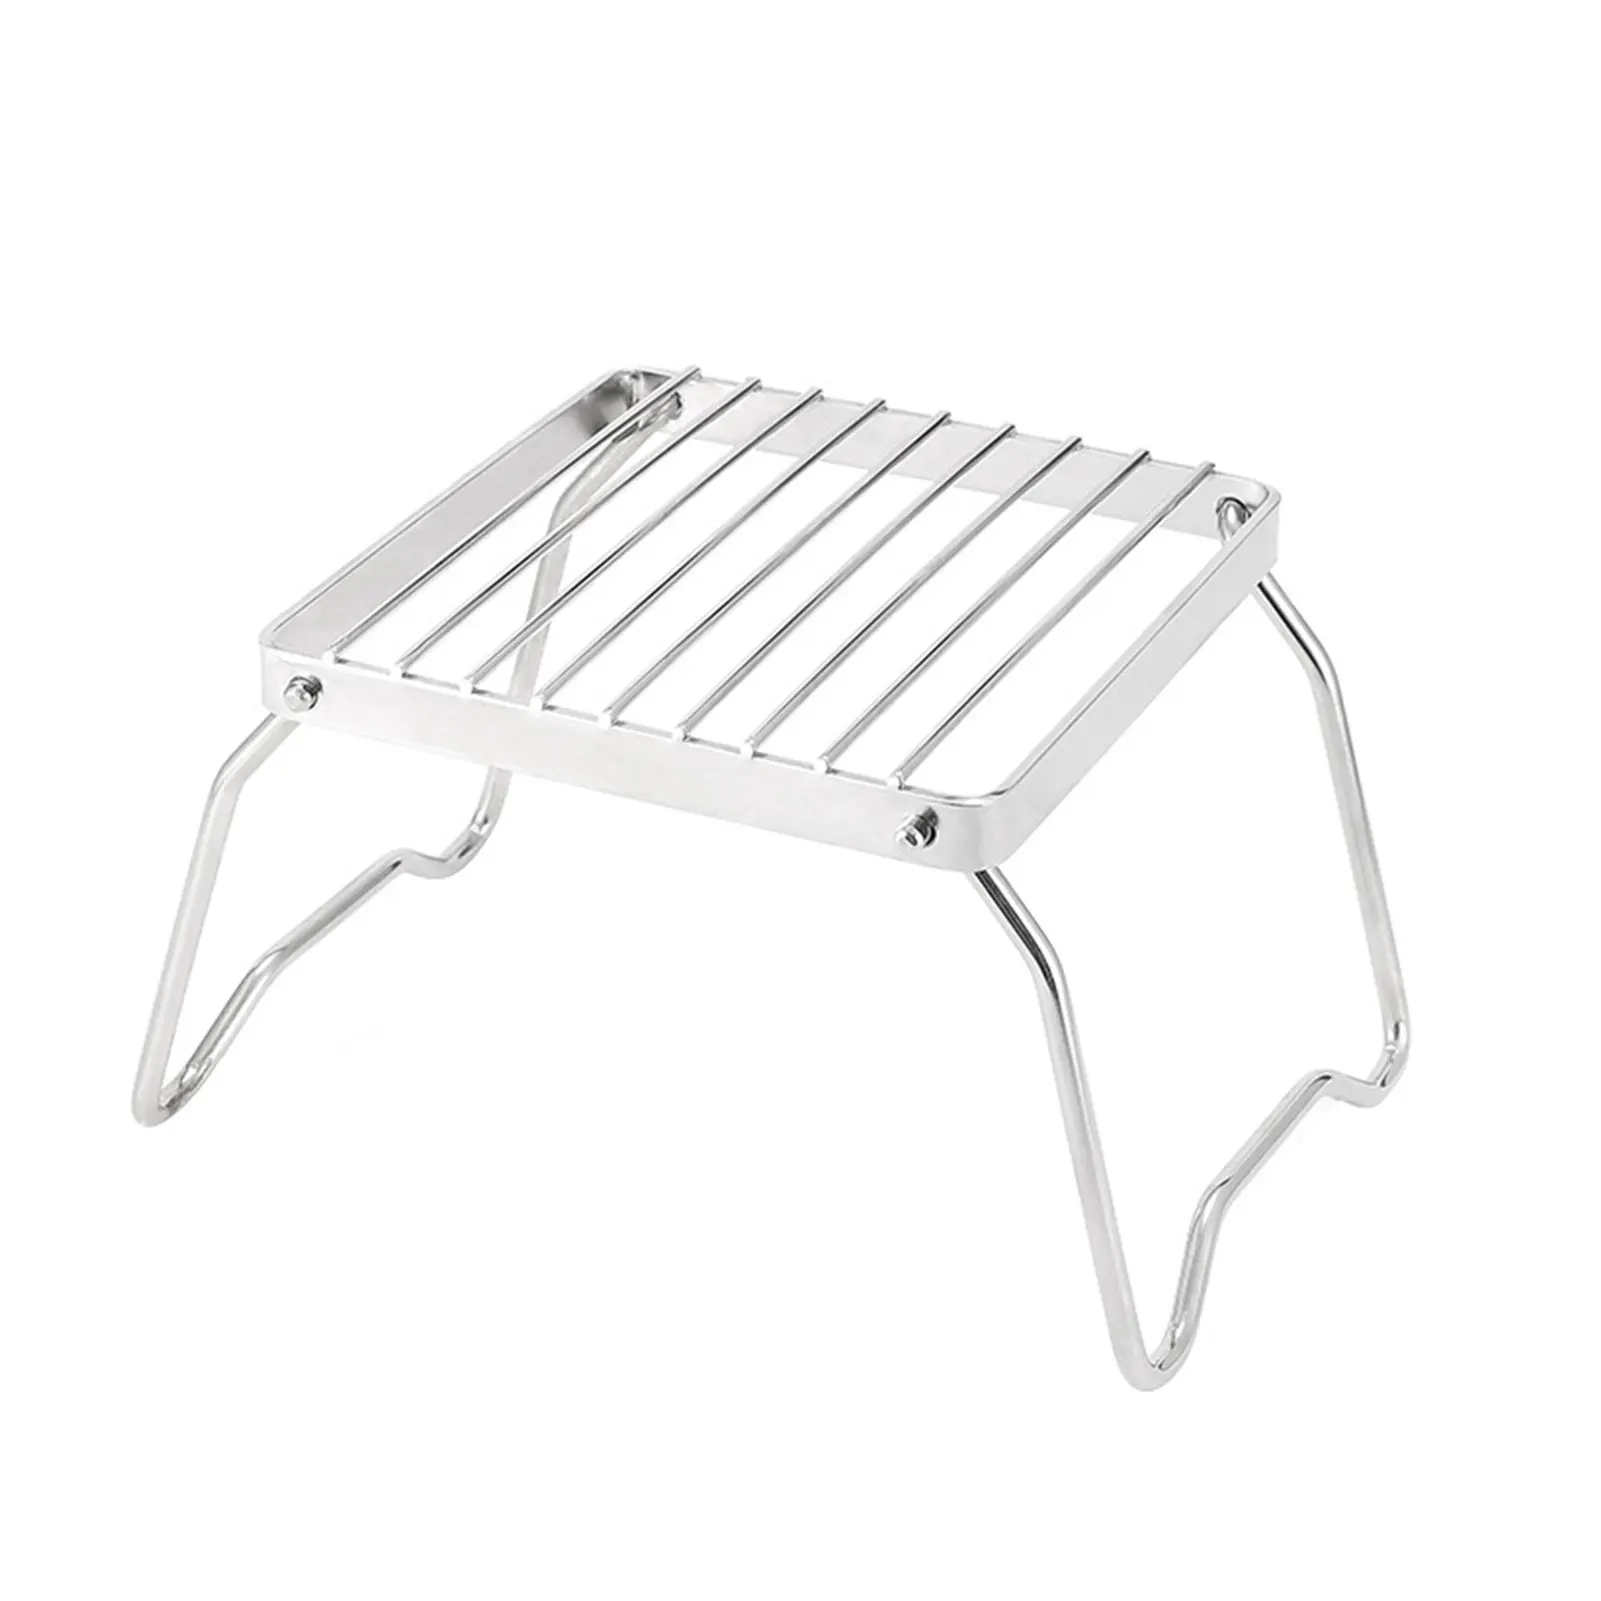 

Campfire Stand Camping Grill 304 Stainless Steel Grate Camping Stove Portable Camping Hiking Fire Pit And Survival Stove Rocket